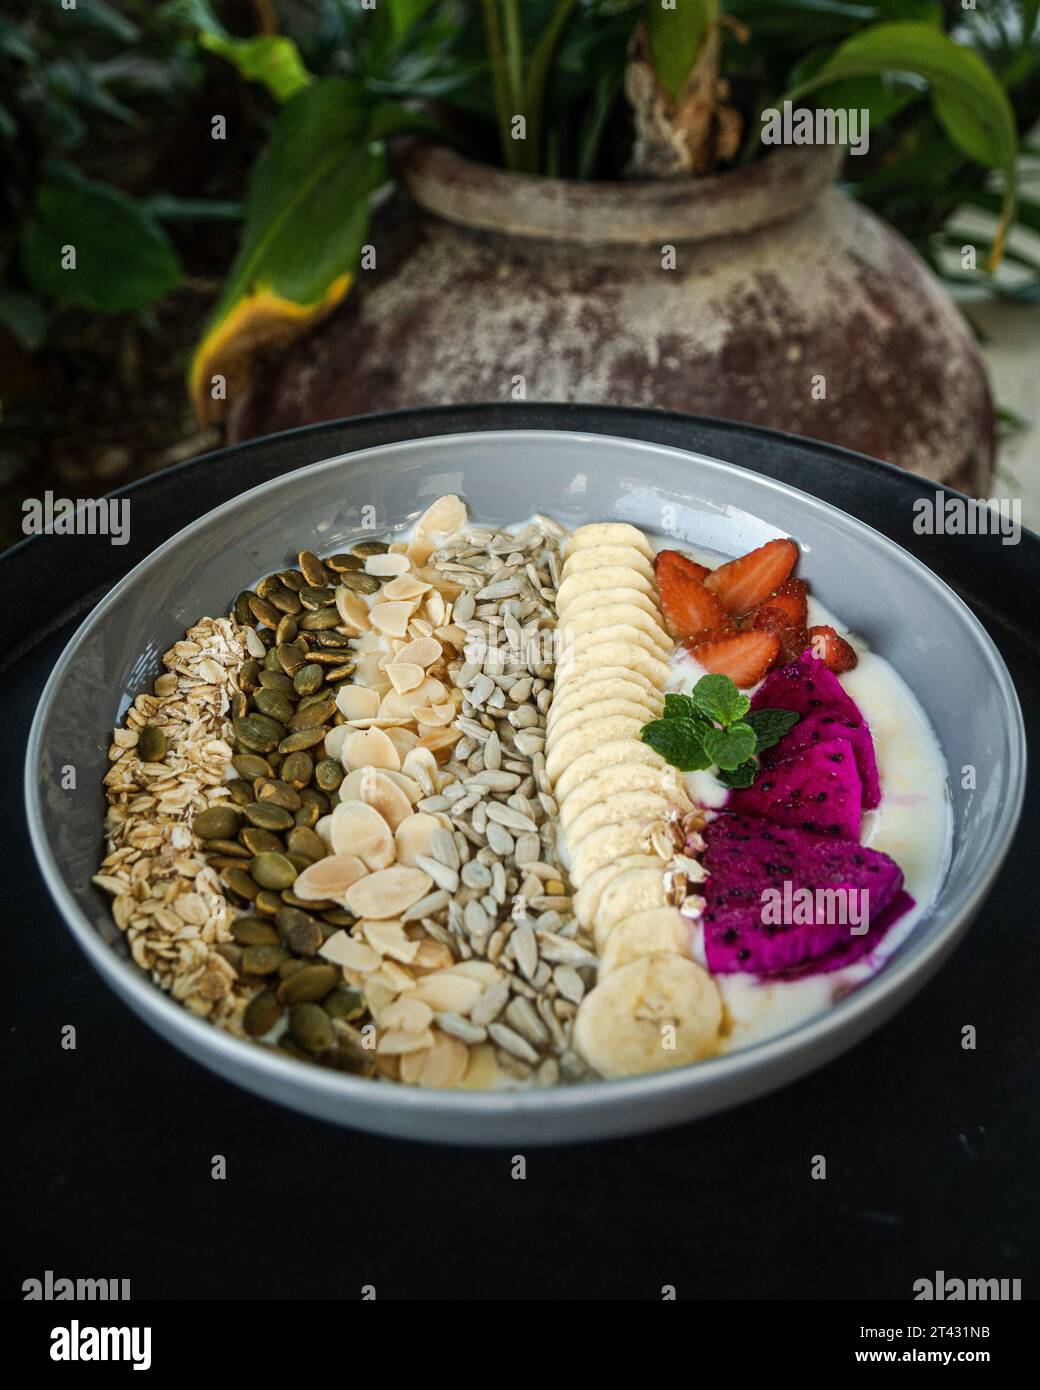 Close-up of a bowl of yogurt with fresh strawberries, dragon fruit, bananas, nuts and seeds Stock Photo